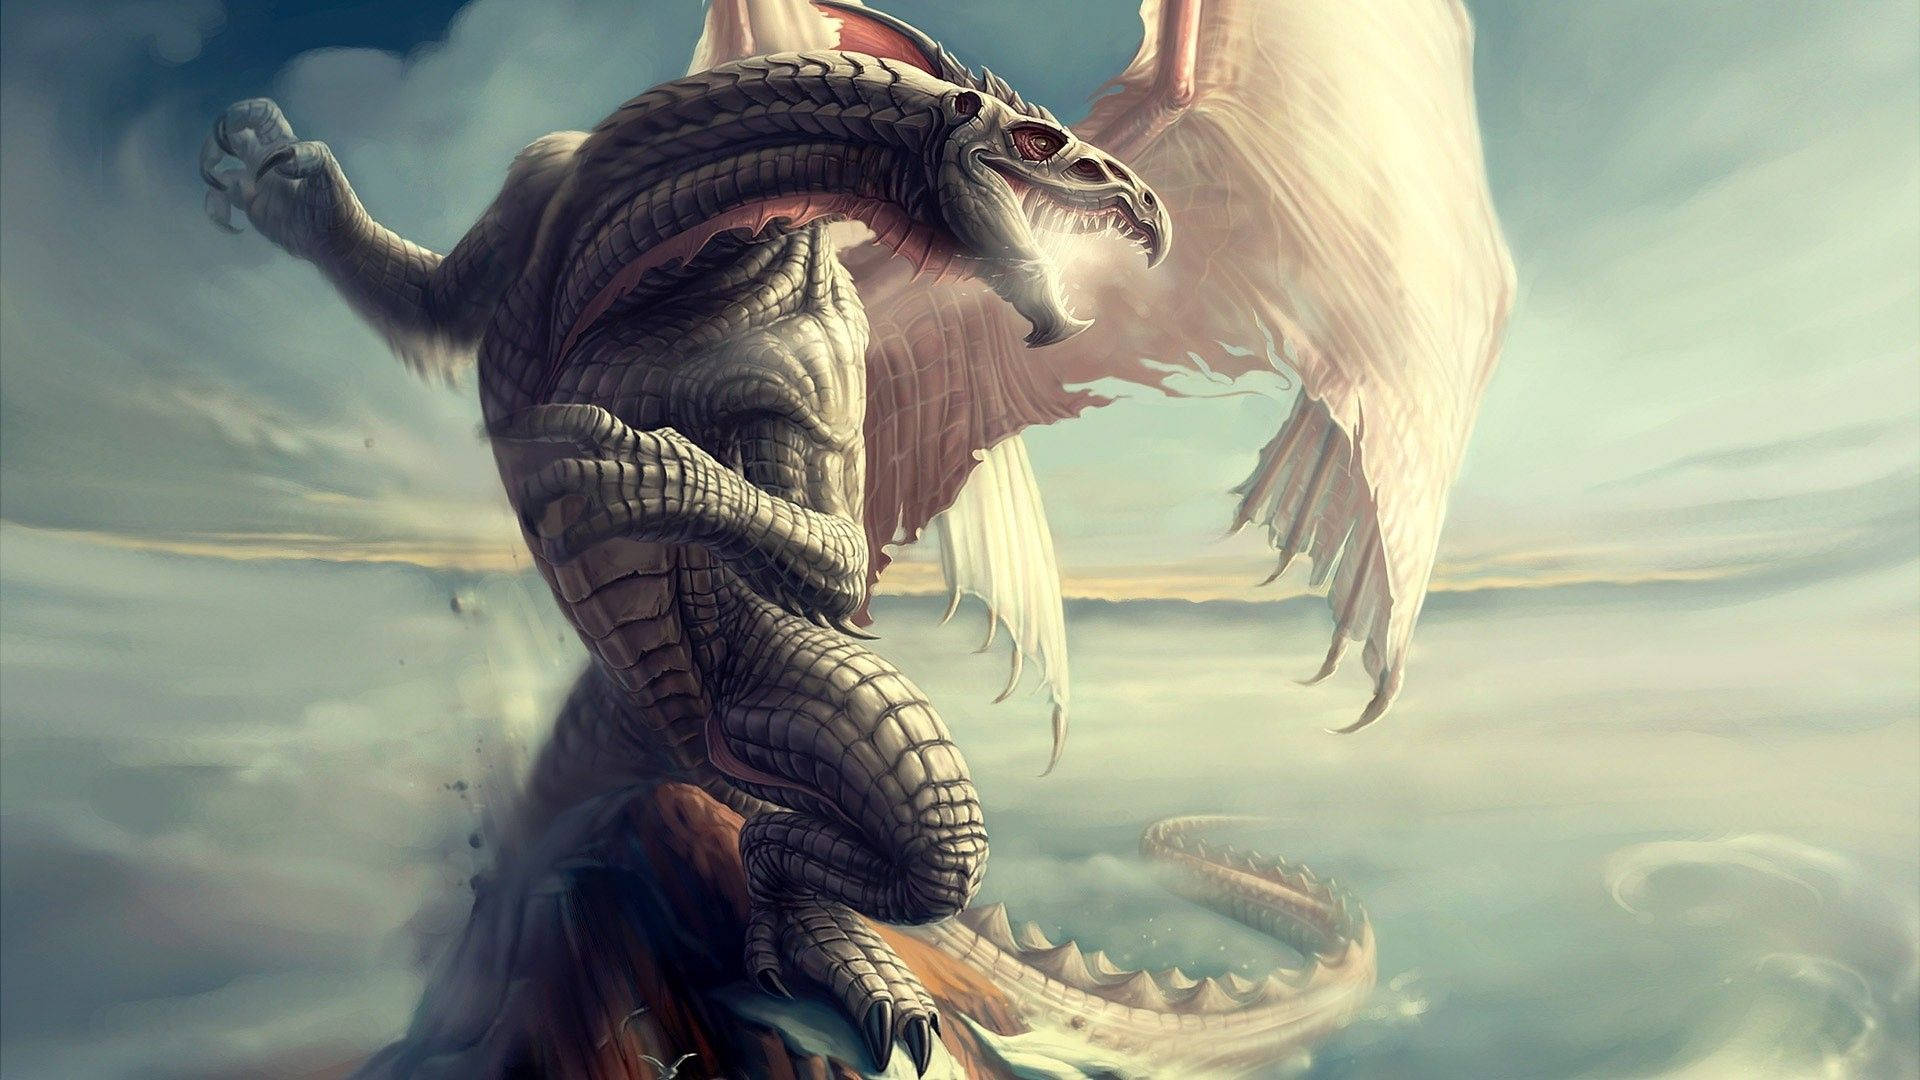 Scaly Painted Dragon Art Background